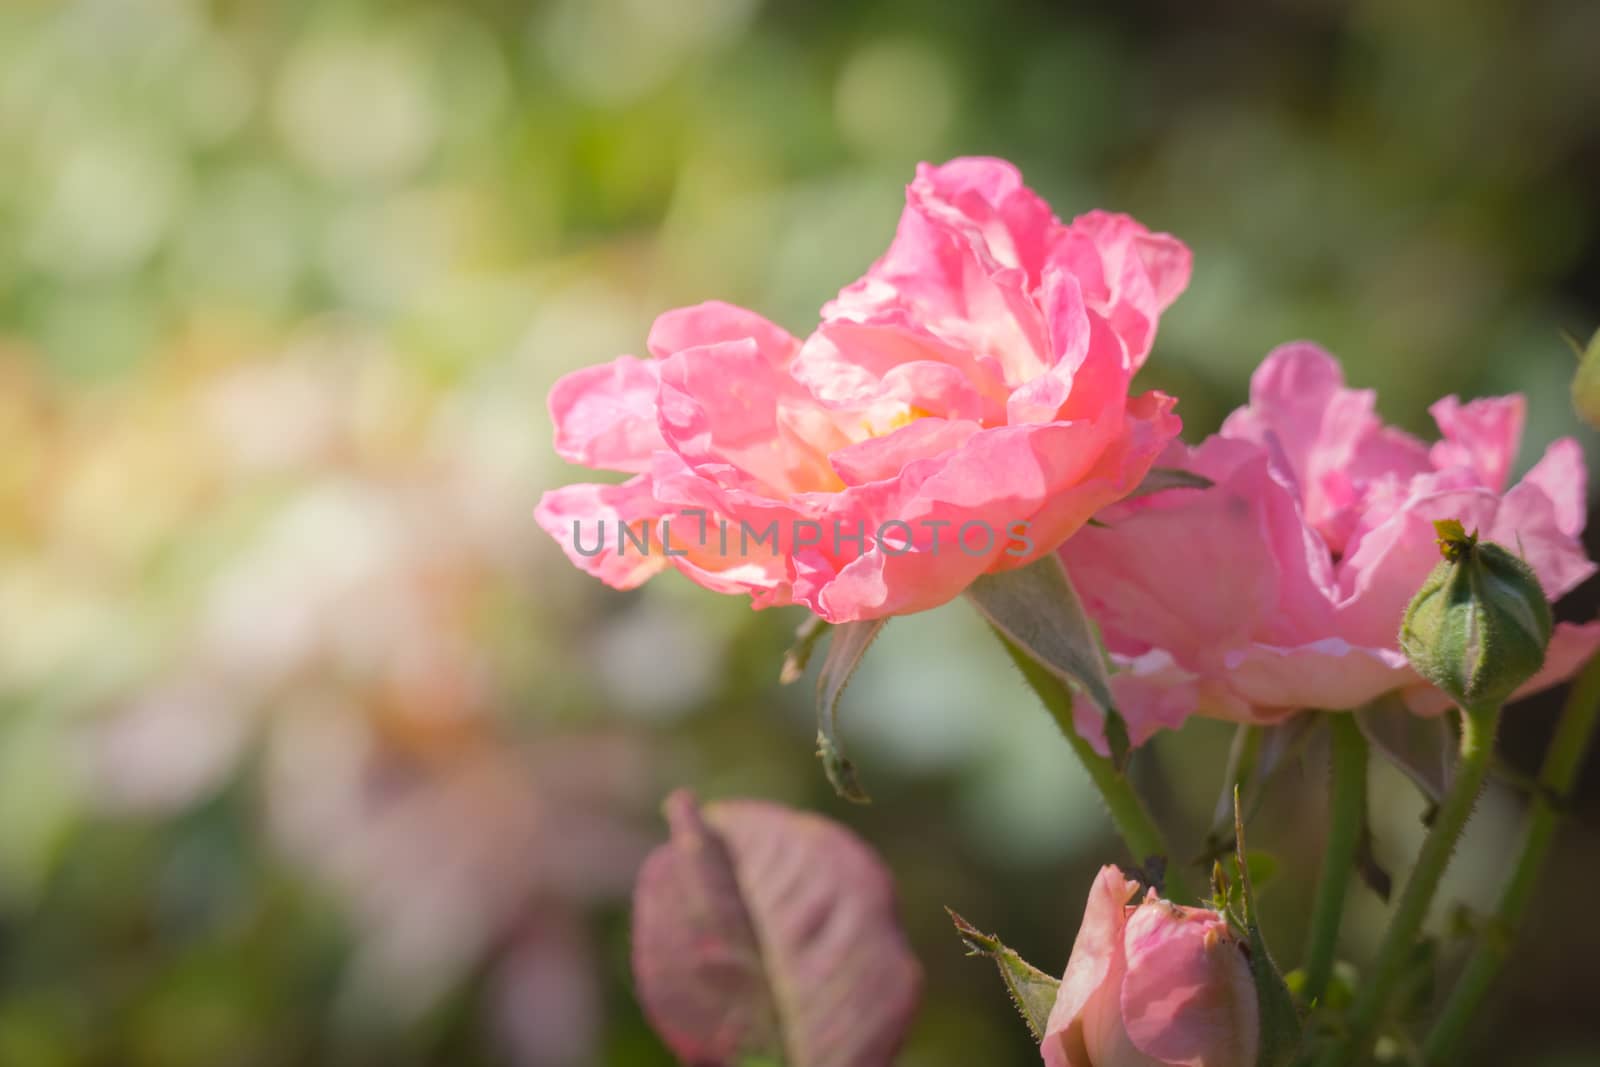 Roses in the garden  by teerawit